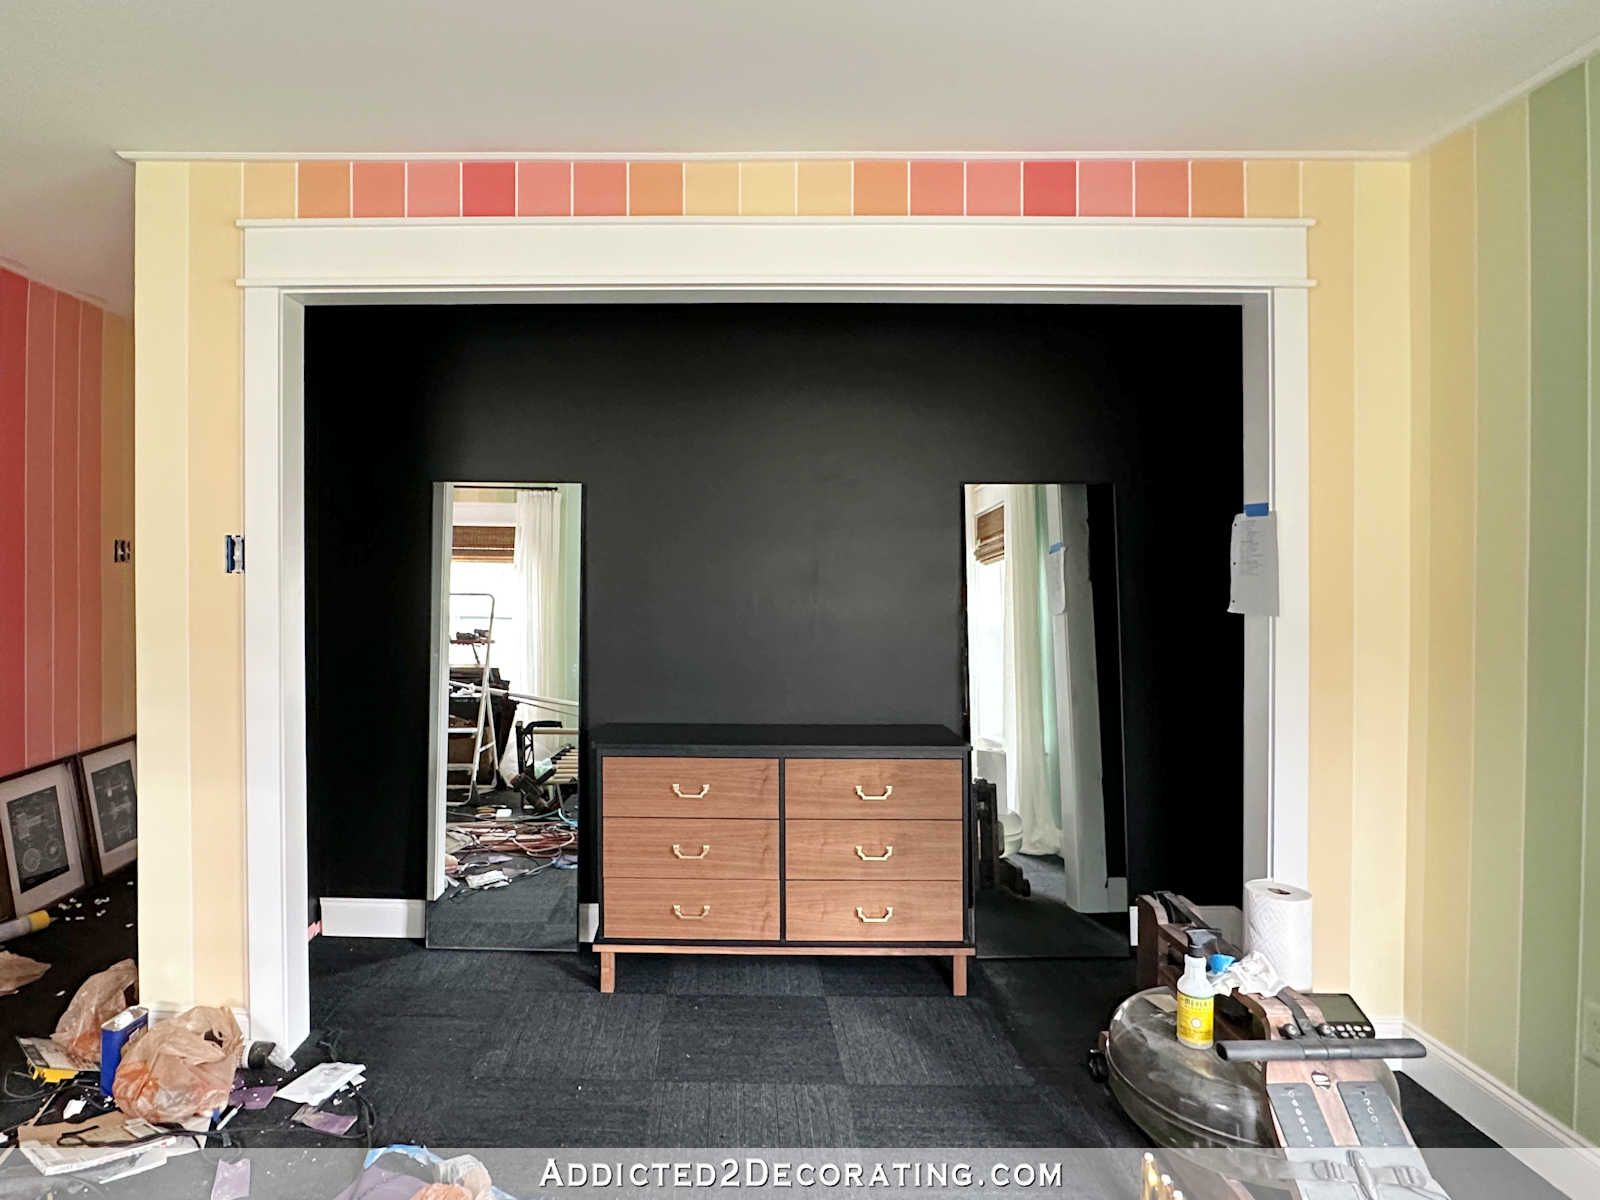 Were Black Walls The Right Decision?